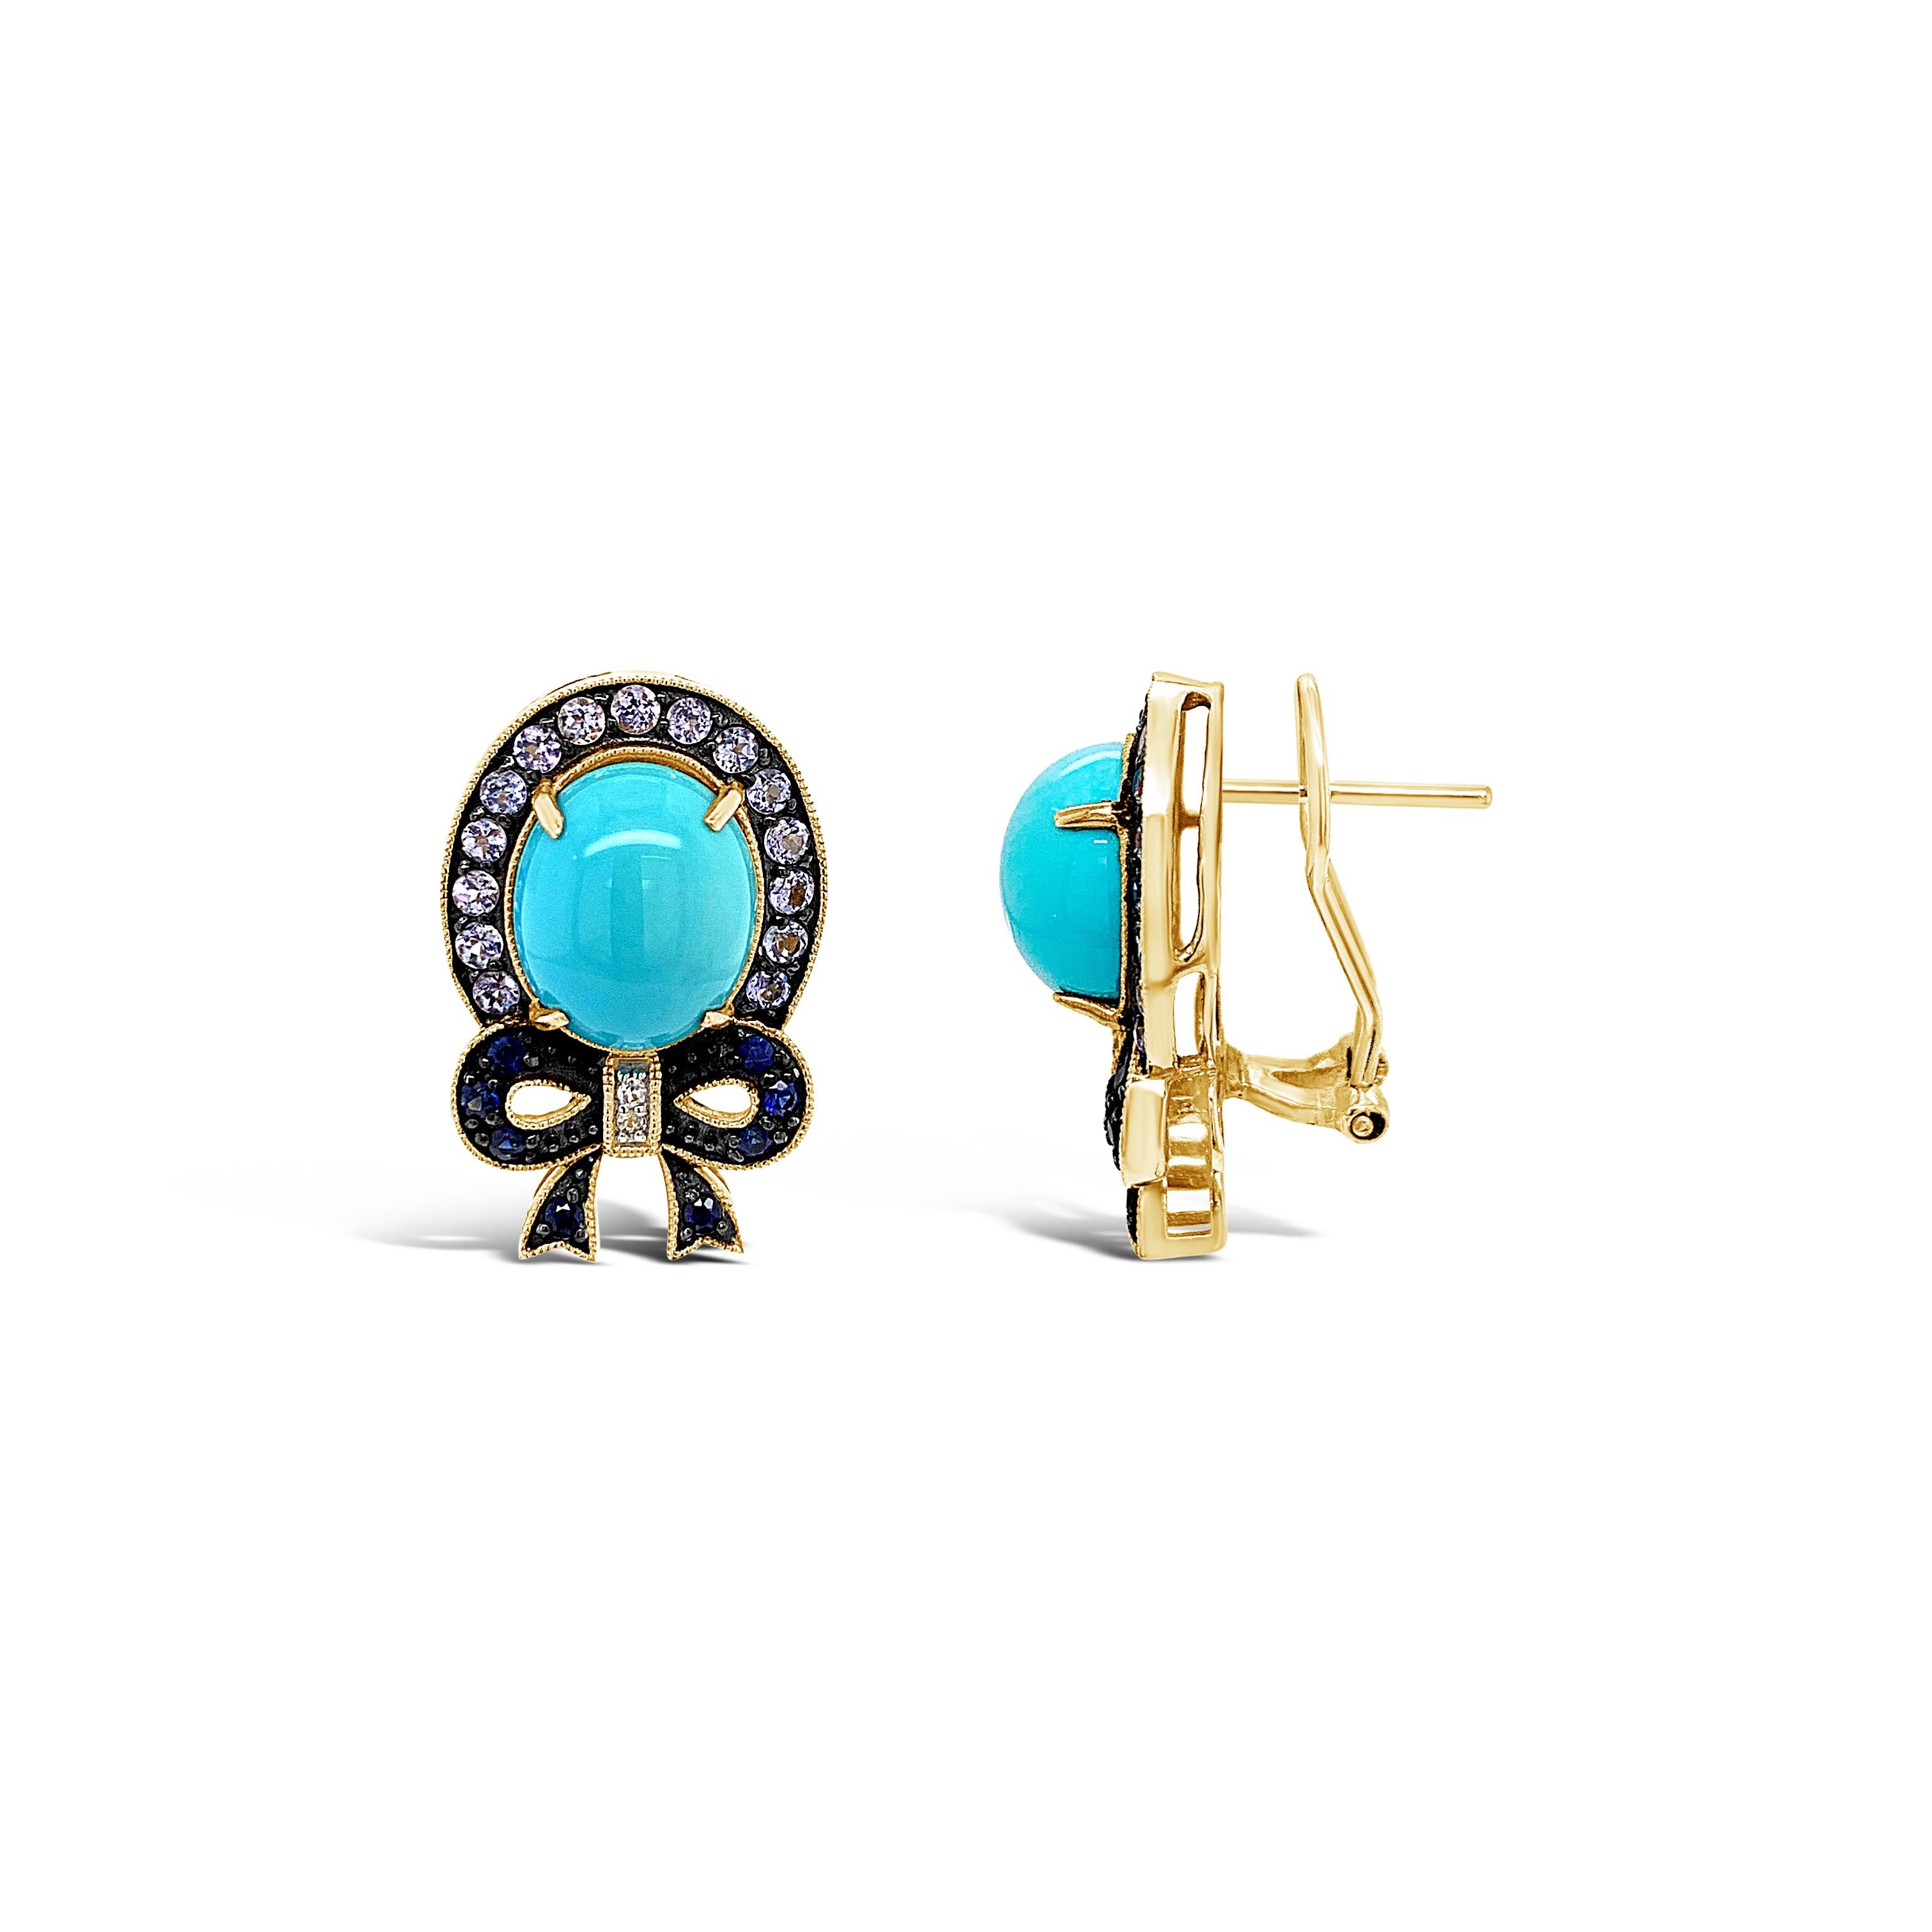 Carlo Viani® Earrings featuring 5 1/4 cts. Robins Egg Blue Turquoise™, 5/8 cts. Blueberry Tanzanite®, 1/3 cts. Blueberry Sapphire™, 1/20 cts. White Sapphire,  set in 14K Honey Gold™

Diamonds Breakdown:
None

Gems Breakdown:
5 1/4 cts Turquoise
5/8